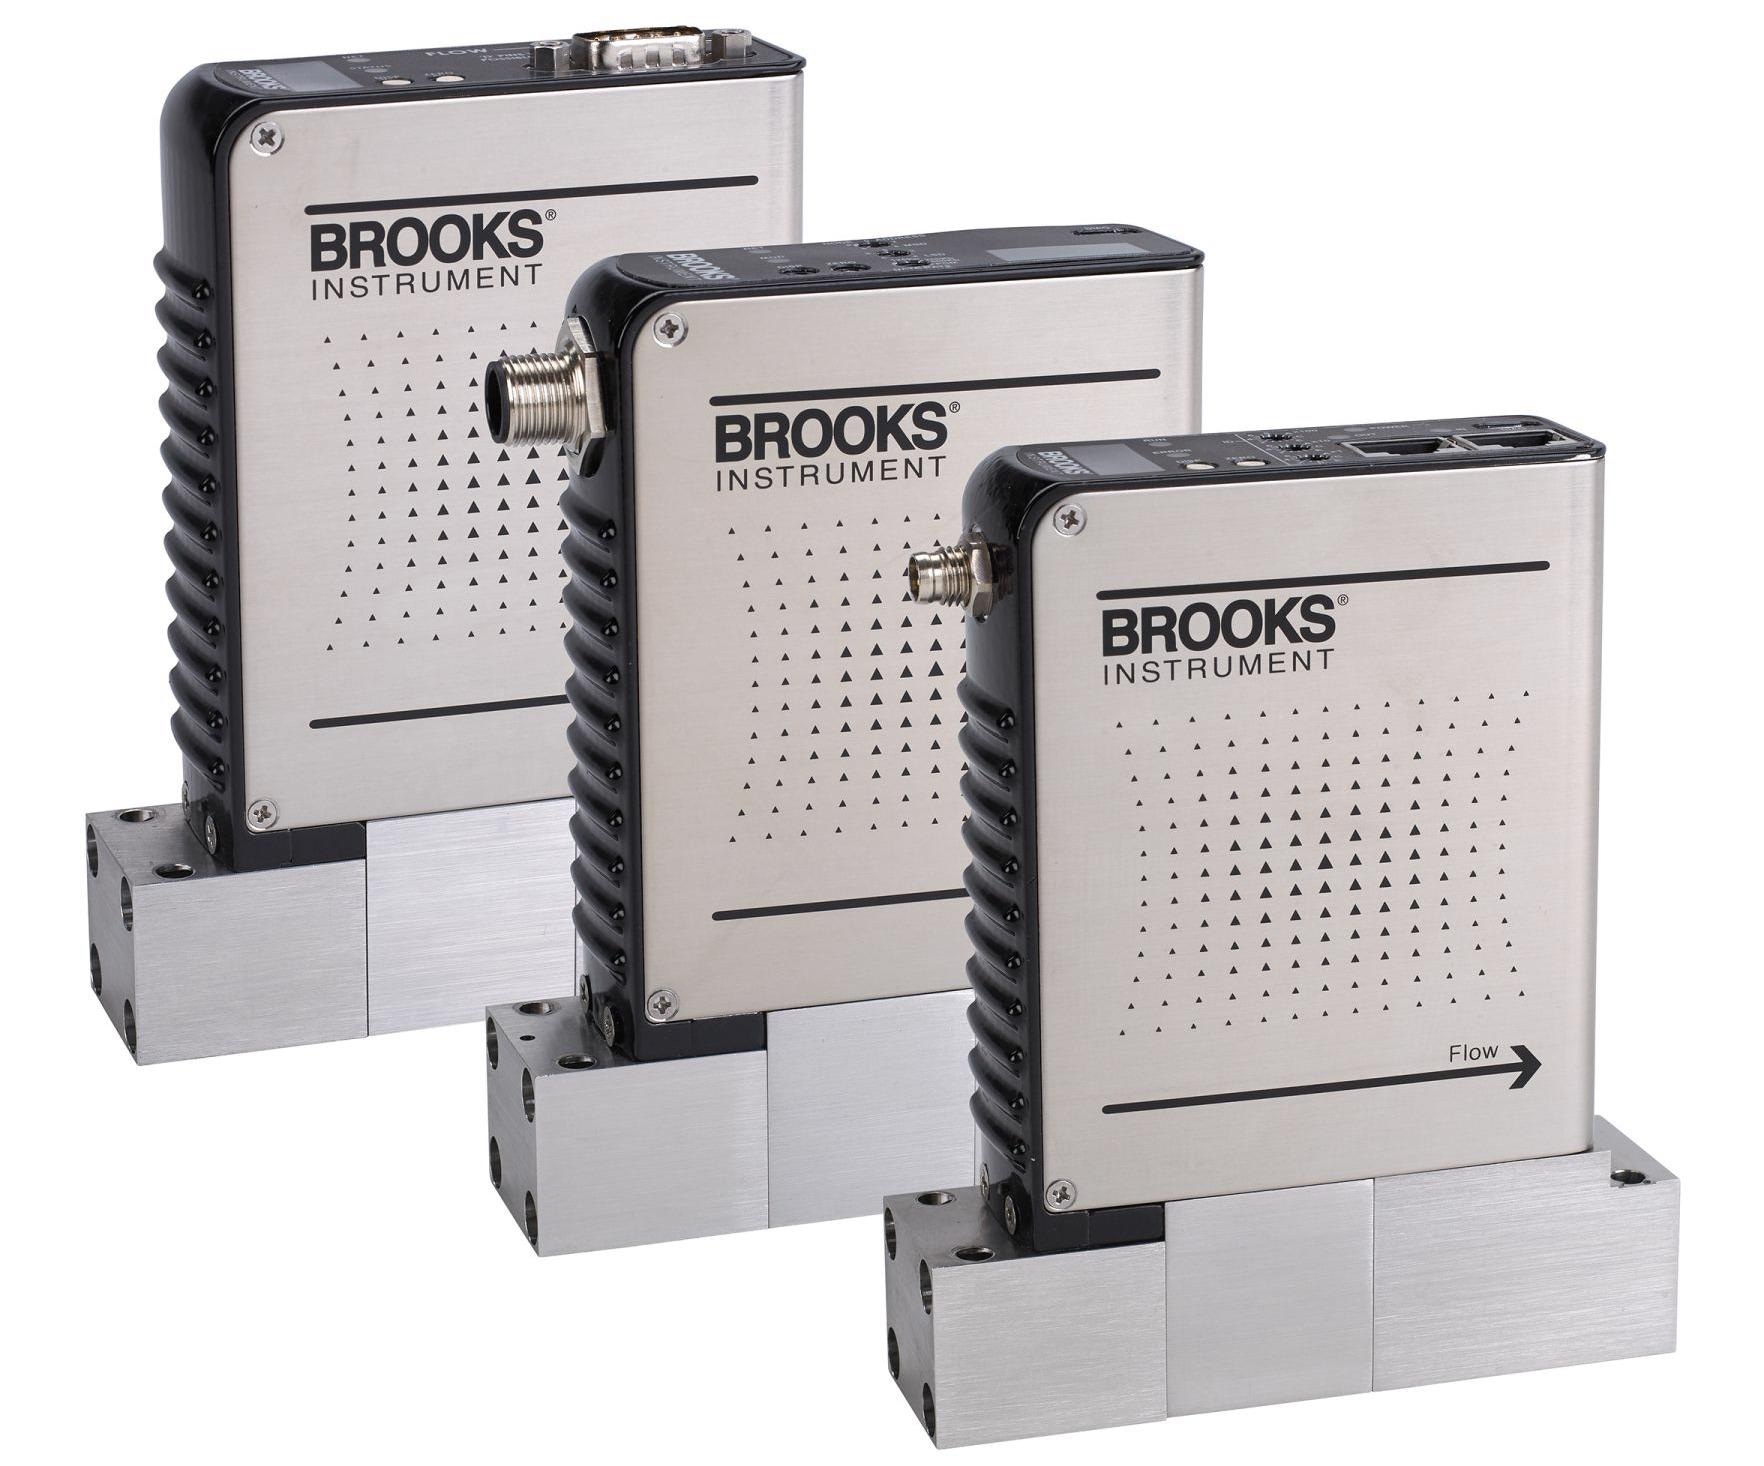 Brooks Instrument Introduces First Fully Pressure-Insensitive Pressure-Based Mass Flow Controller for Etch and CVD Processes in Semiconductor Manufacturing